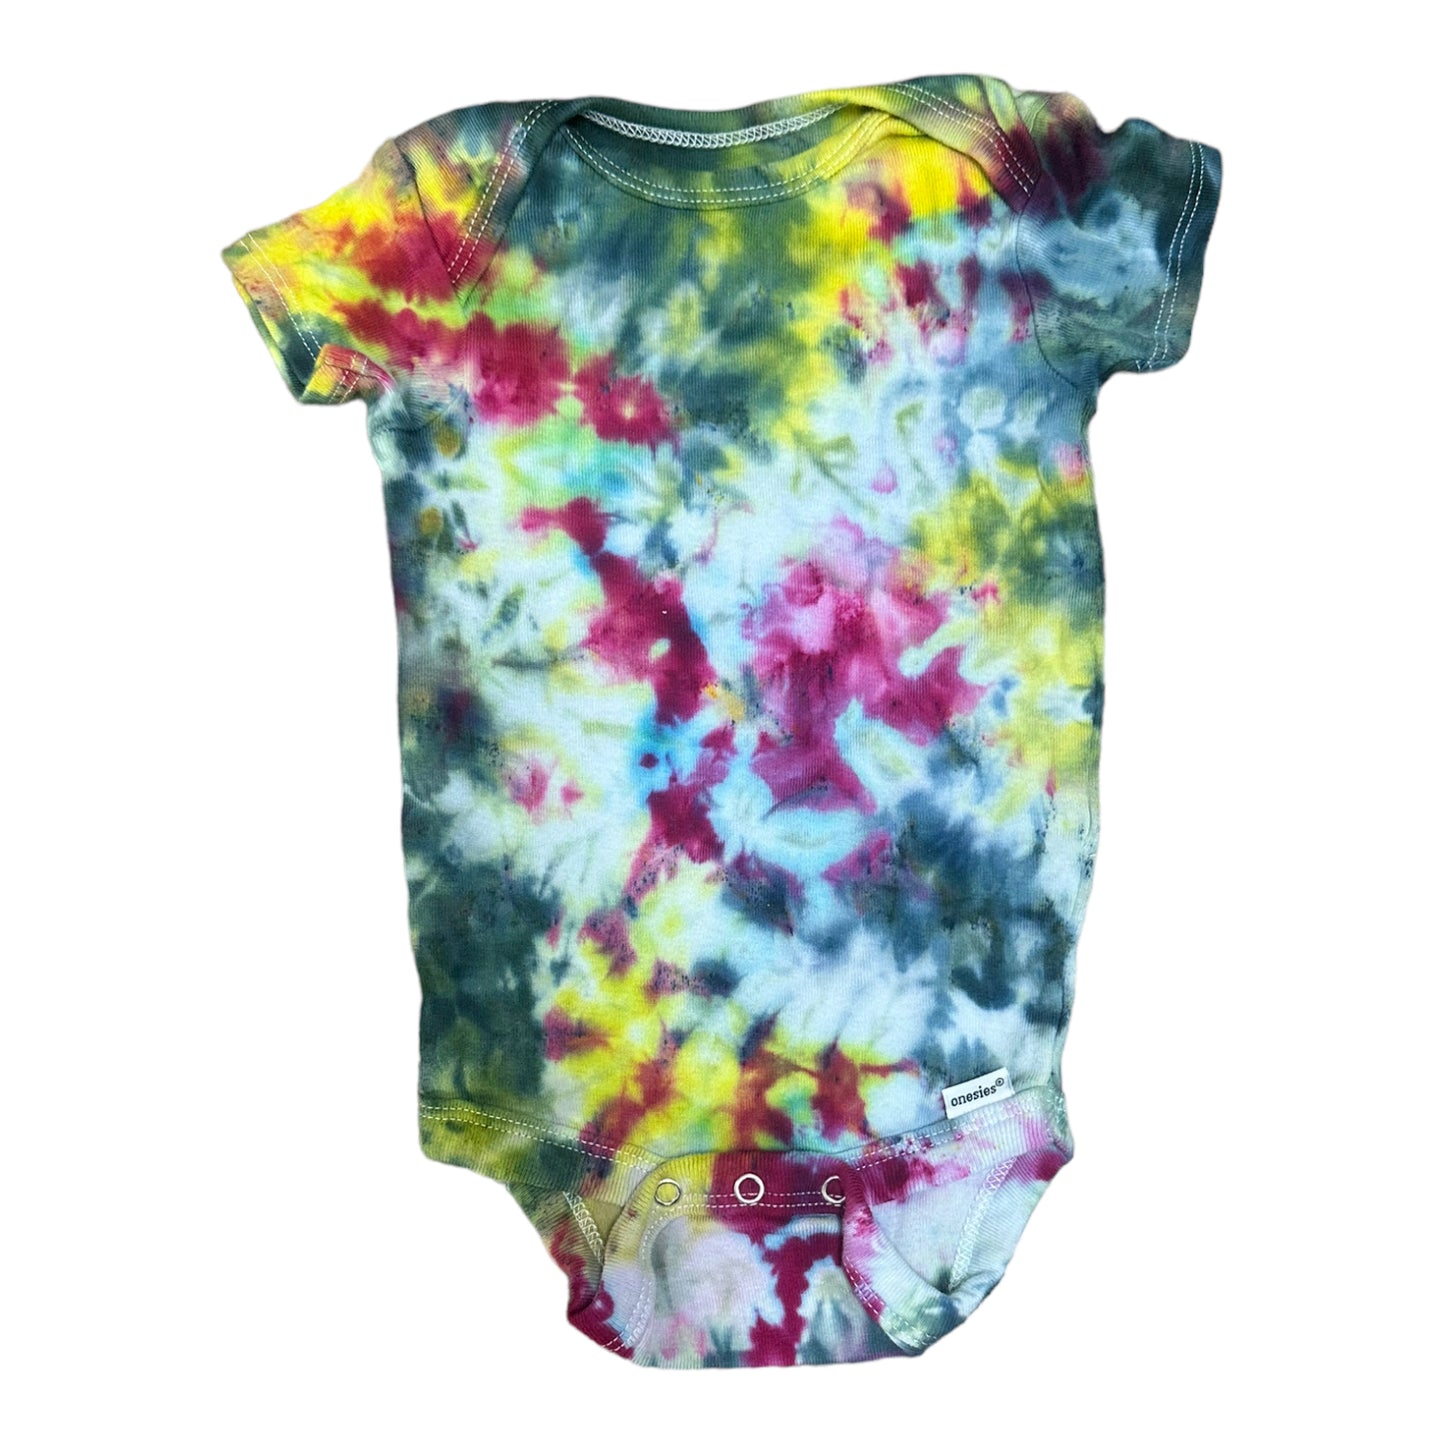 Infant 3-6 Months Teal Yellow and Fuchsia Ice Dye Tie Dye Short Sleeve Onesie